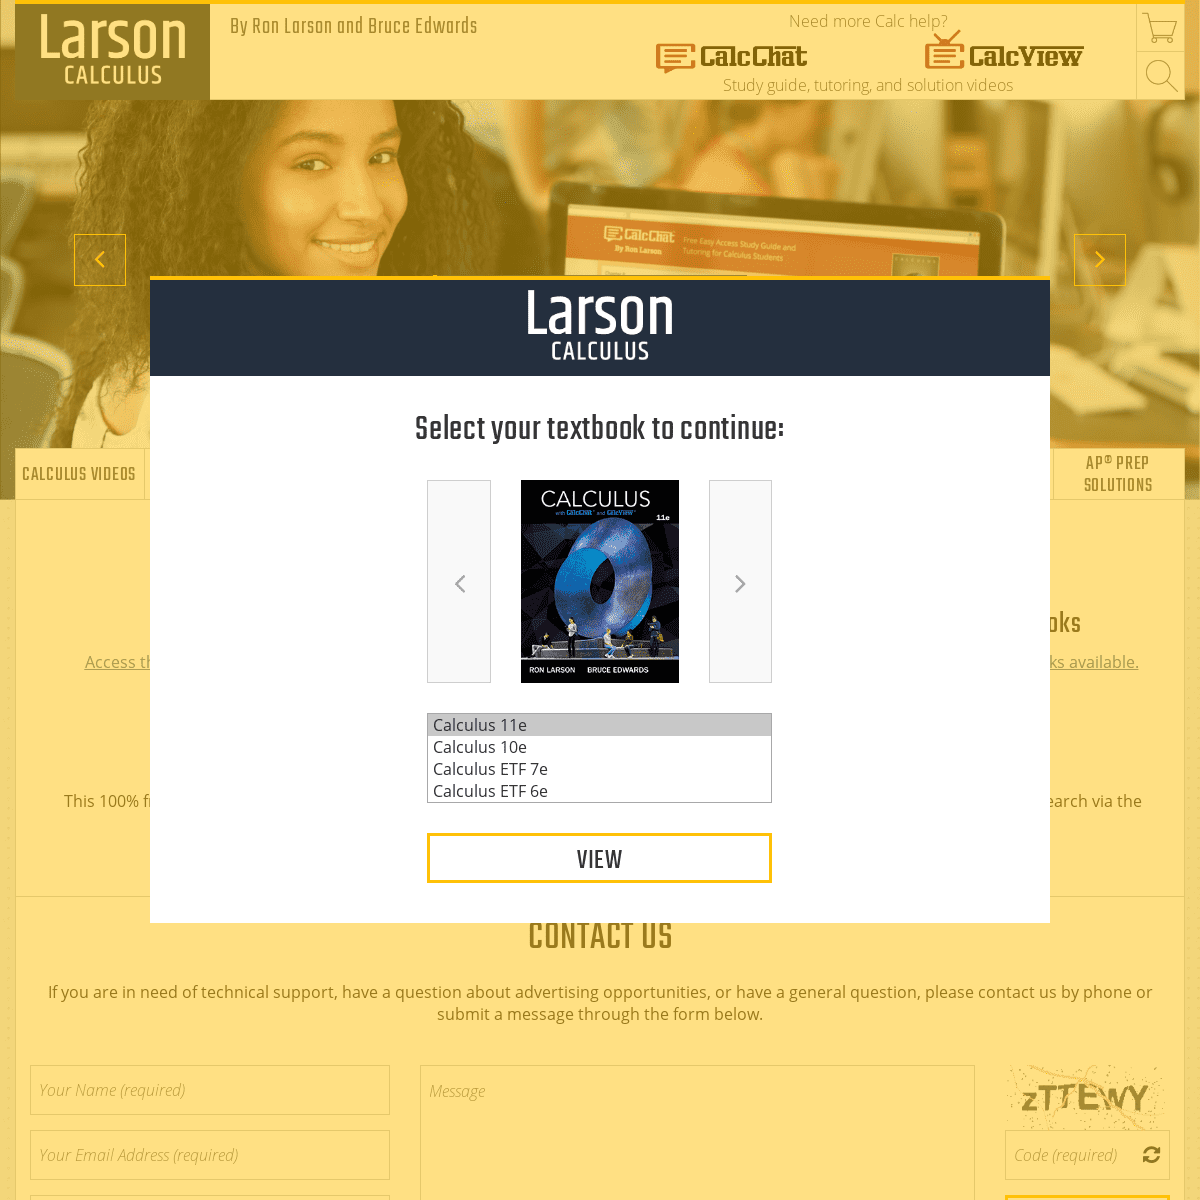 A complete backup of larsoncalculus.com